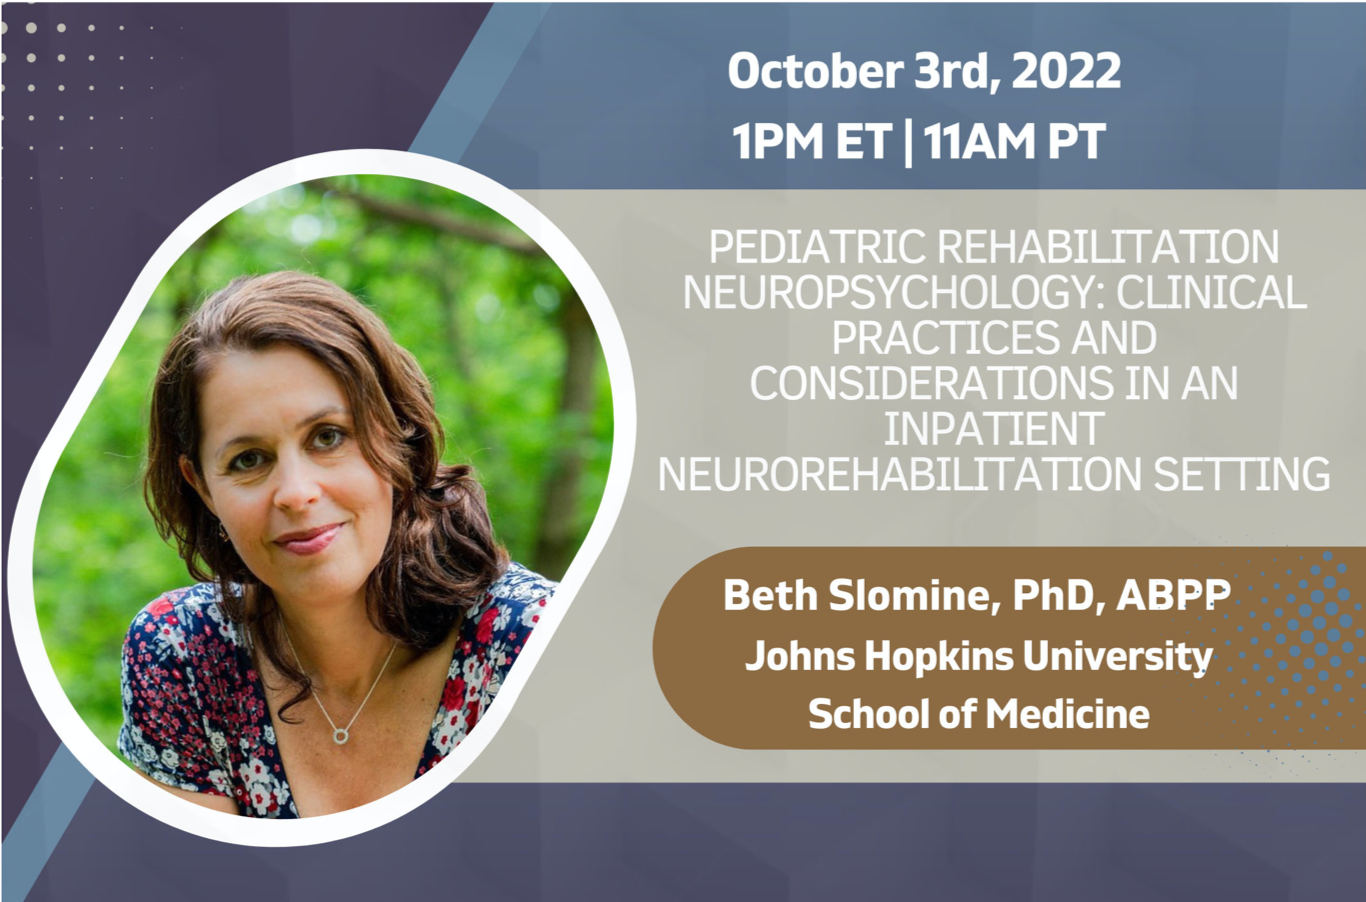 Pediatric Rehabilitation Neuropsychology: Clinical Practices and Considerations in an Inpatient Neurorehabilitation Setting with Dr. Beth Slomine on October 3, 2022 at 1pm ET